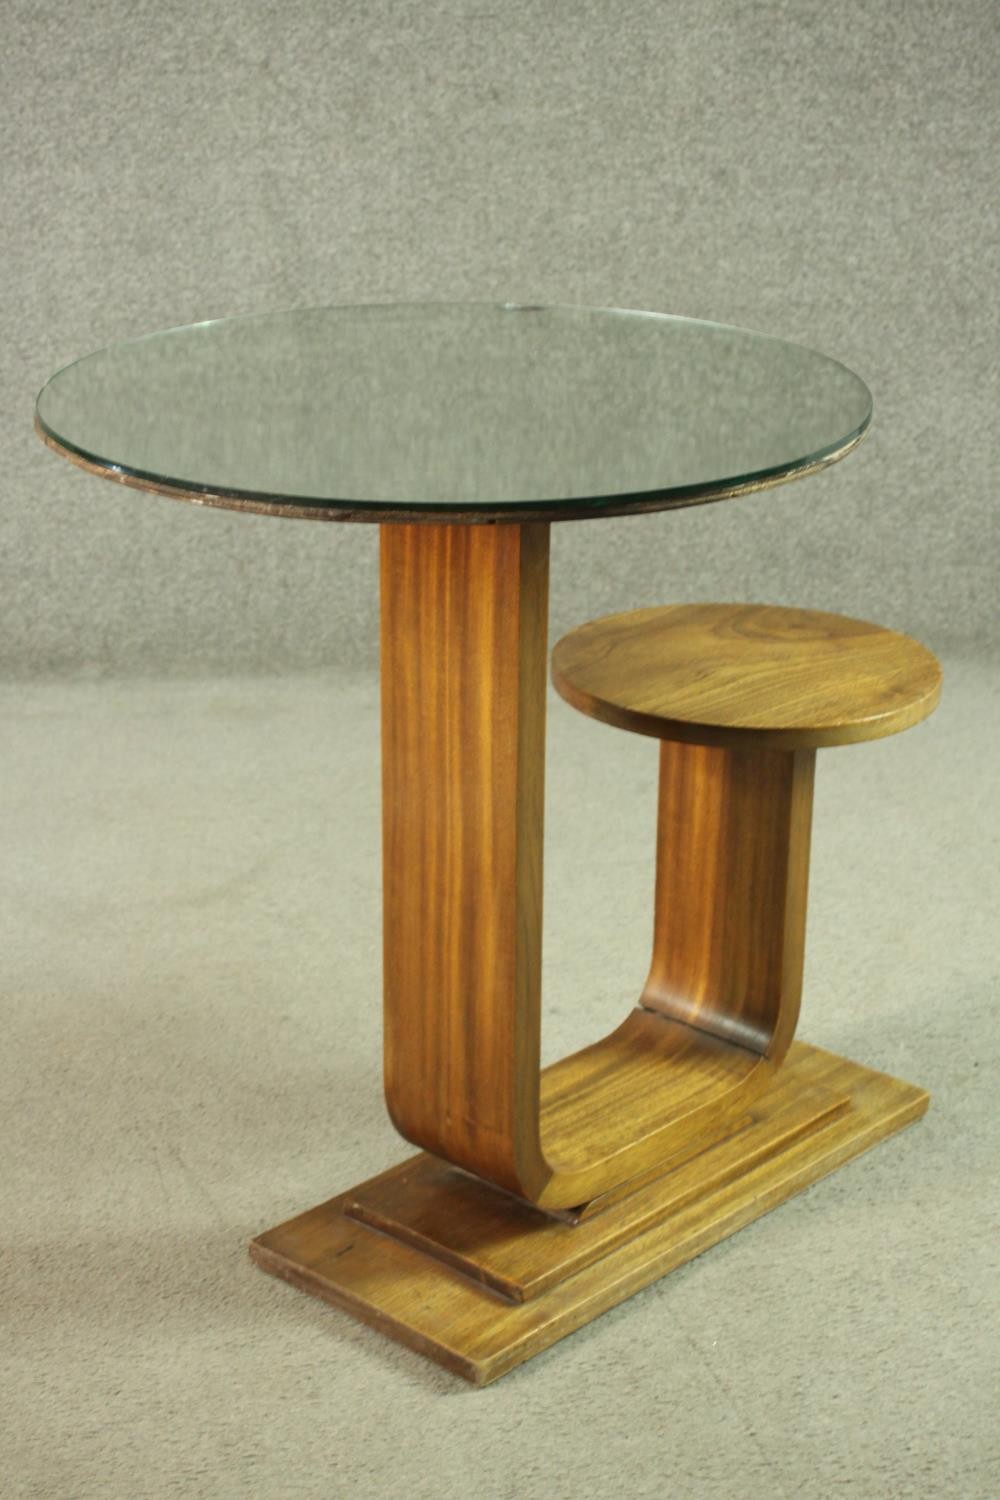 An Art Deco teak table and stool, with a circular glass table top, on a support which curves up to a - Image 4 of 8